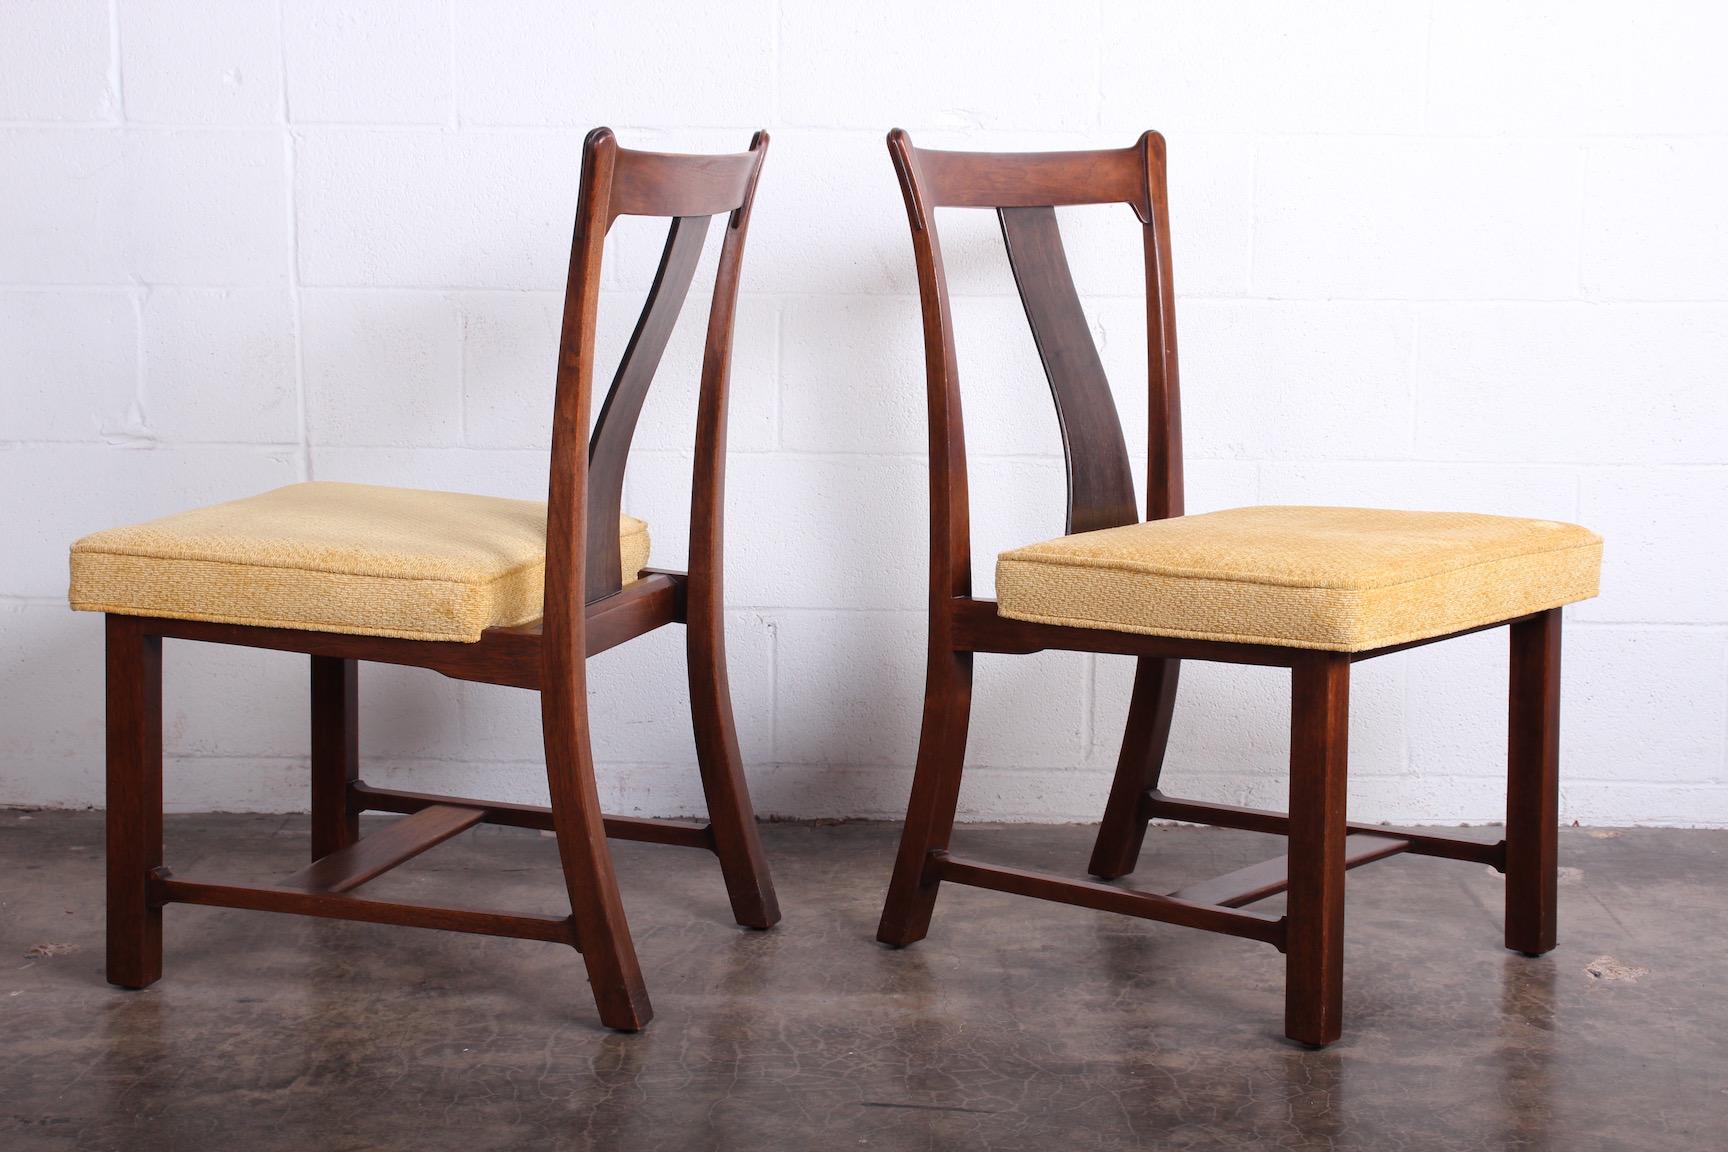 Mid-20th Century Four Dining Chairs by Edward Wormley for Dunbar